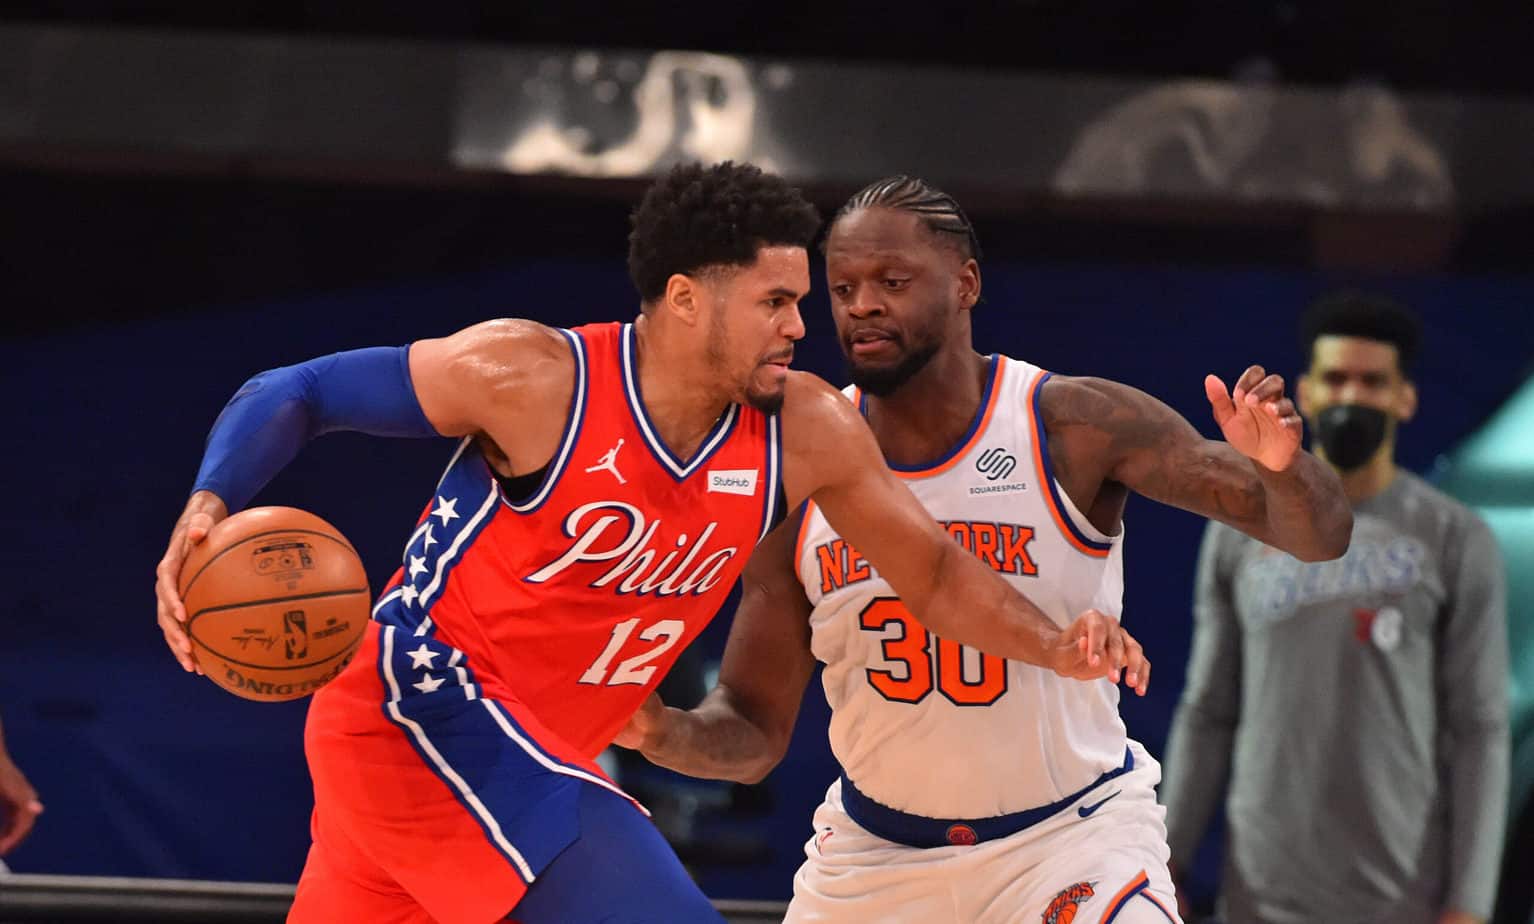 Philadelphia 76ers vs. NY Knicks – Betting odds and Preview